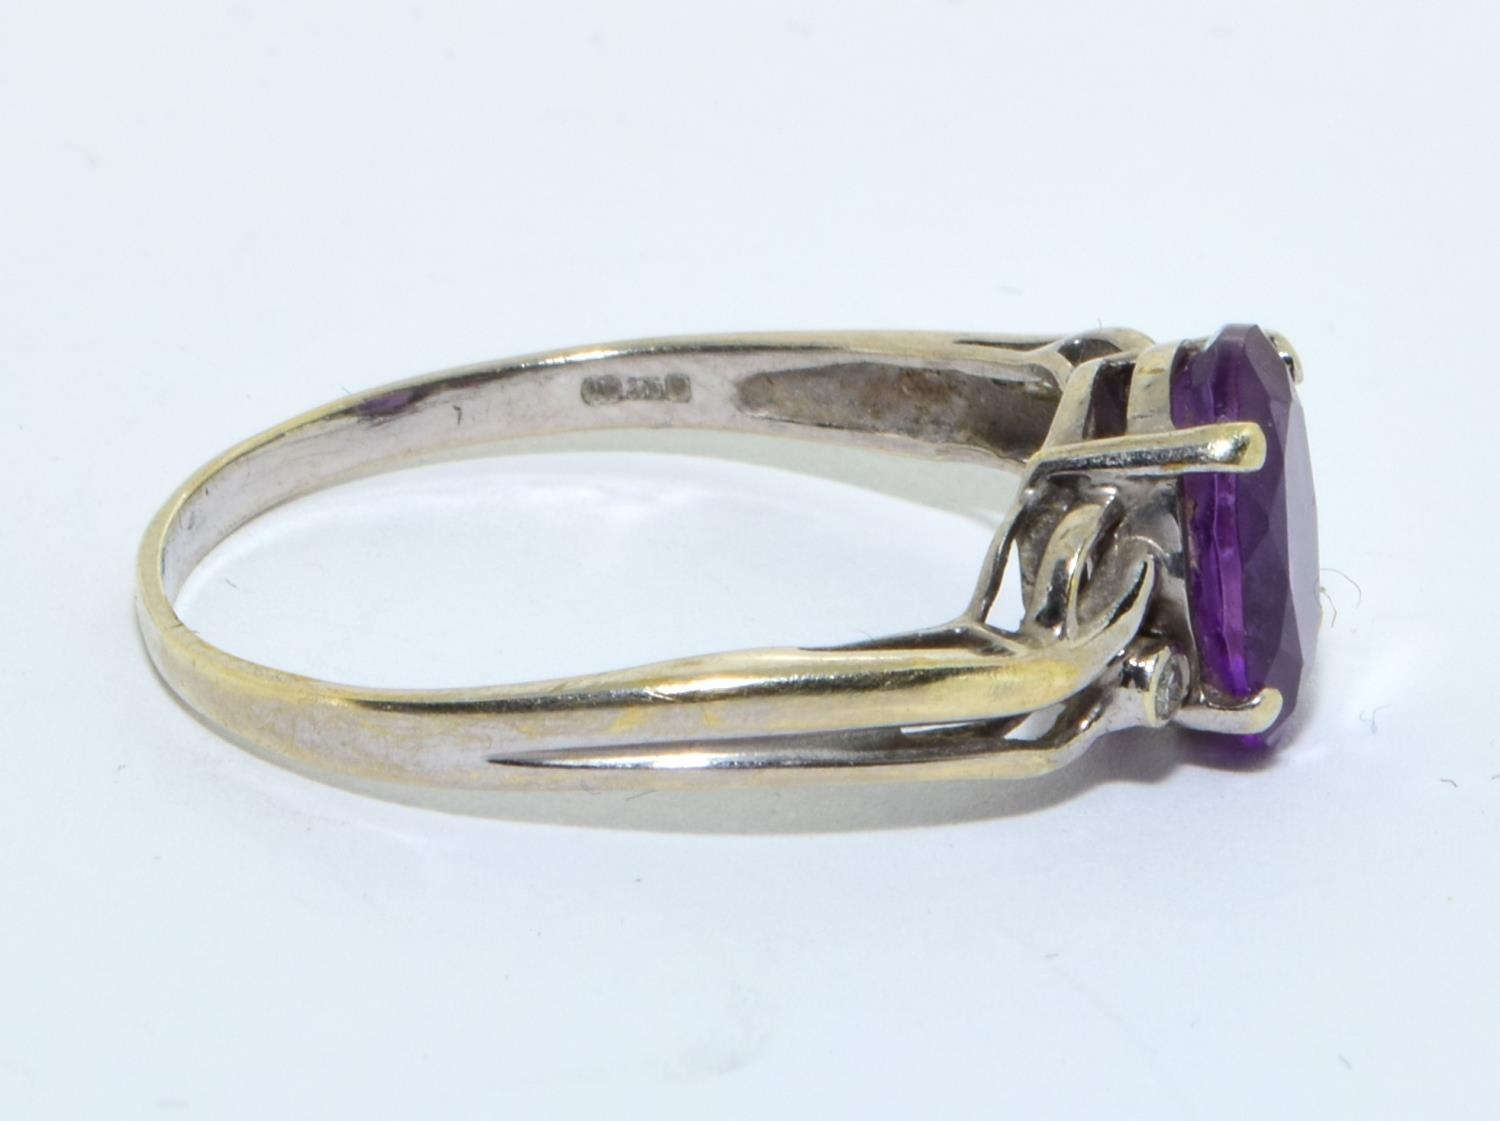 9ct white gold ladies Amethyst and diamond open work setting ring size S - Image 4 of 5